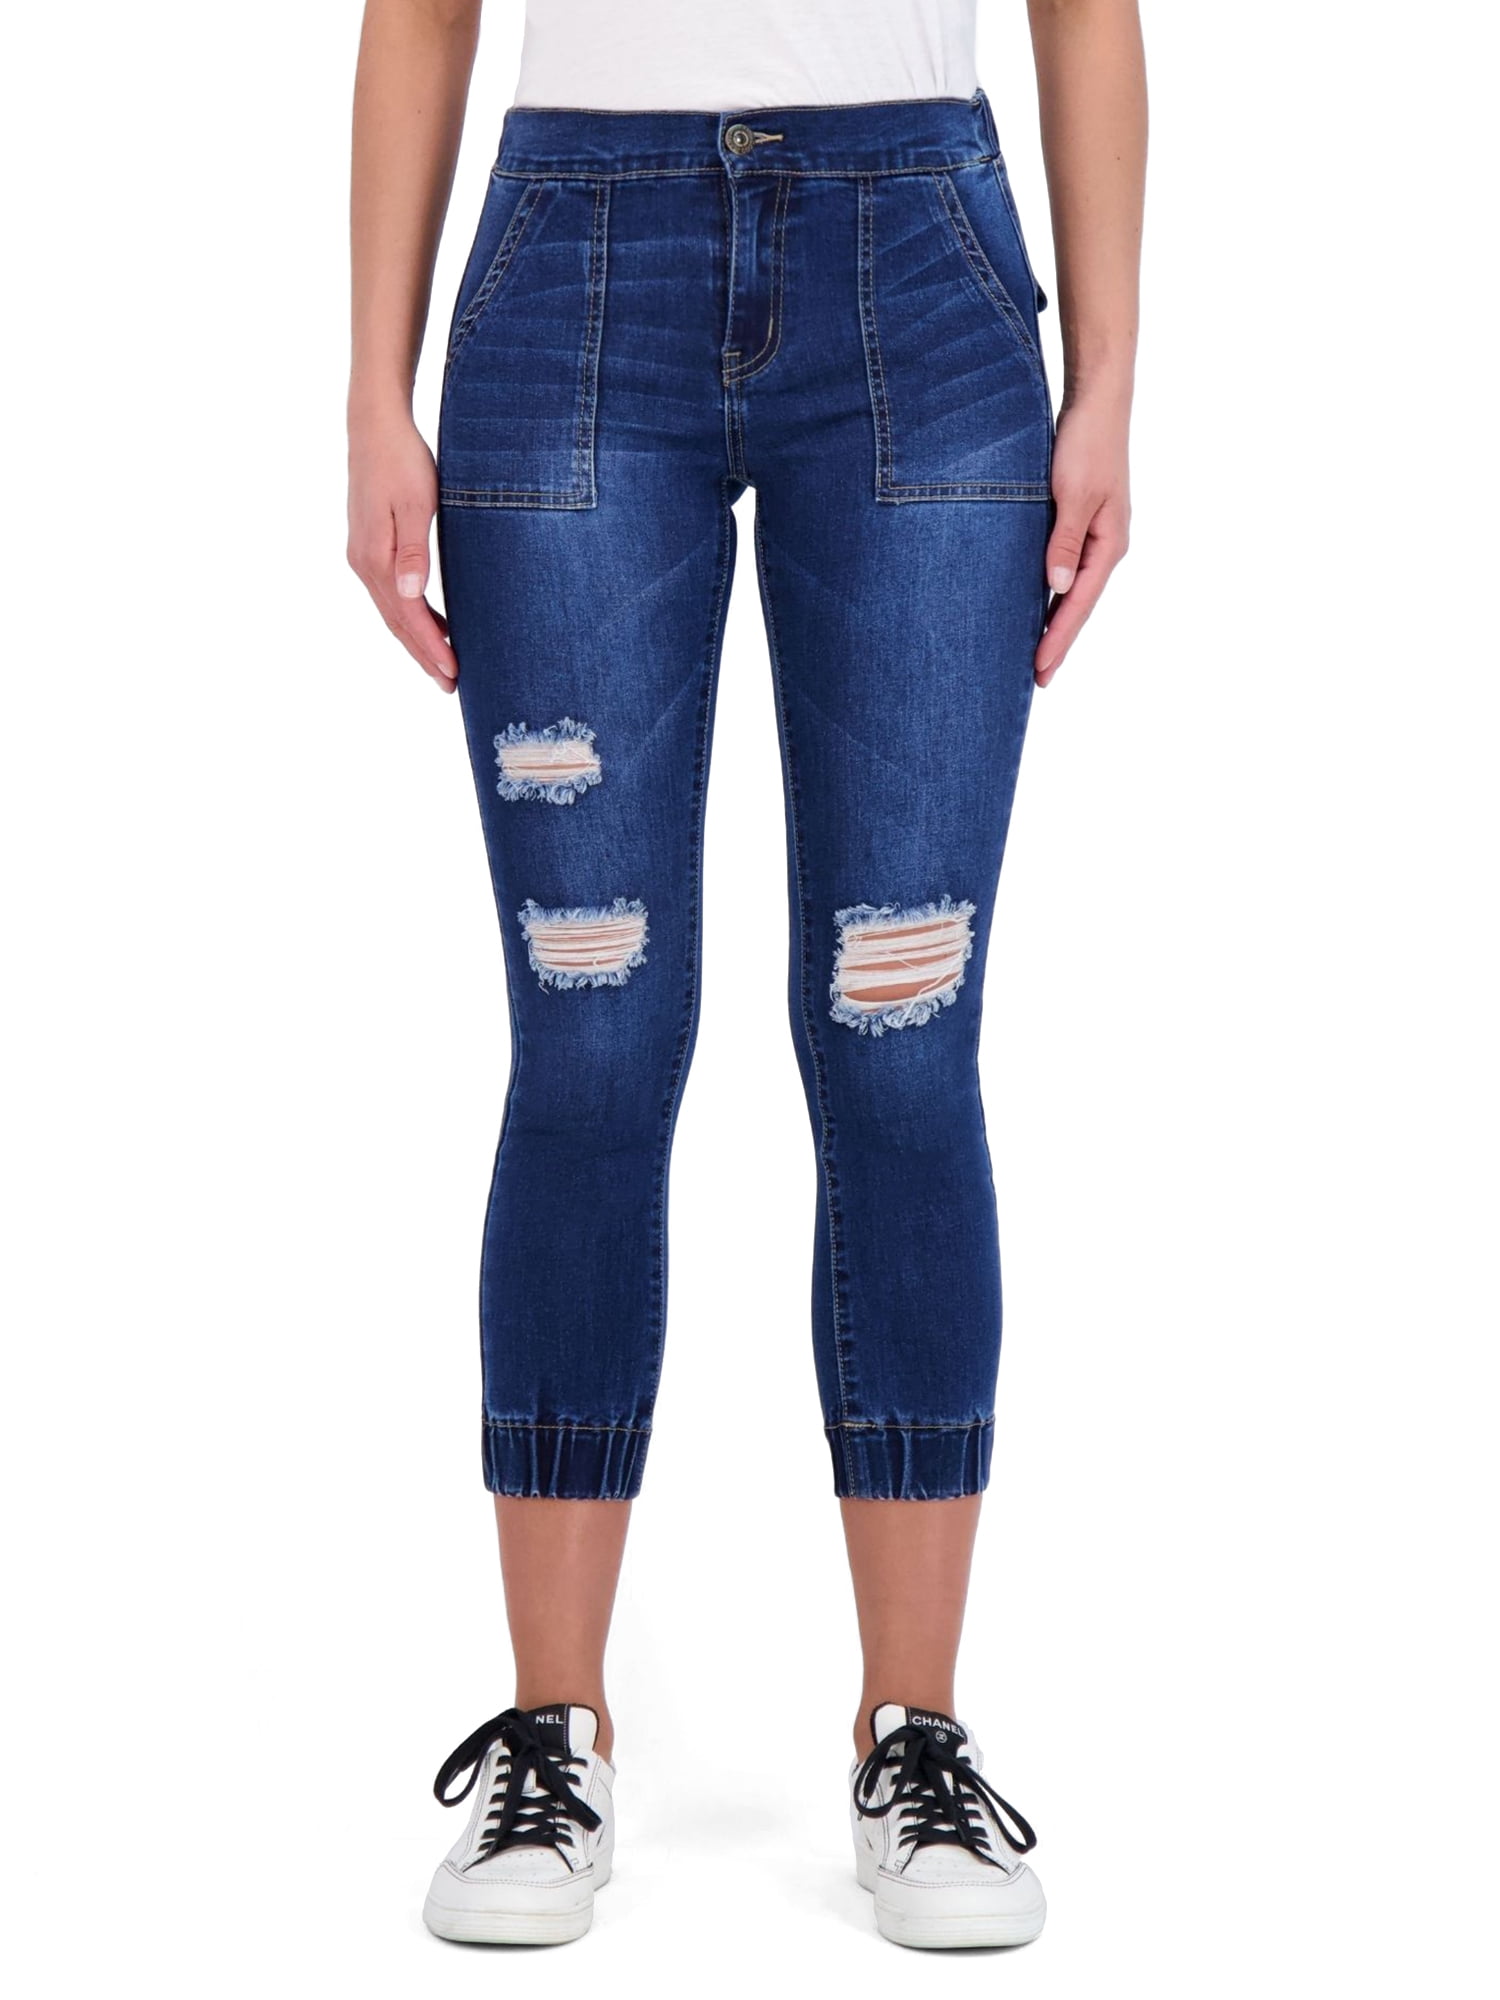 Chanel Low-Rise Skinny Jeans